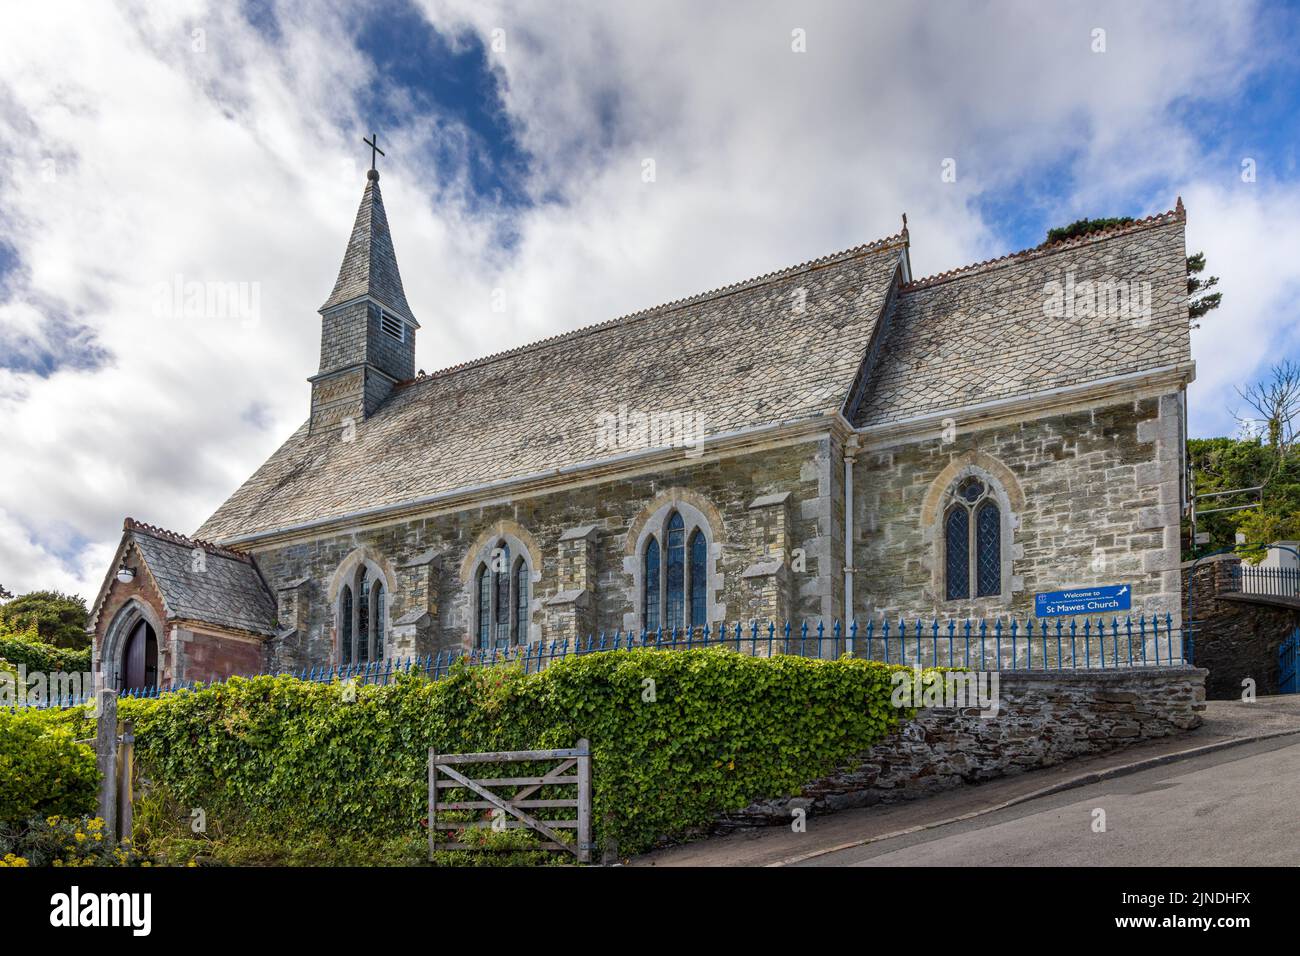 St Mawes Church in the picturesque village of St Mawes on the Roseland Peninsula in Cornwall, England. Stock Photo